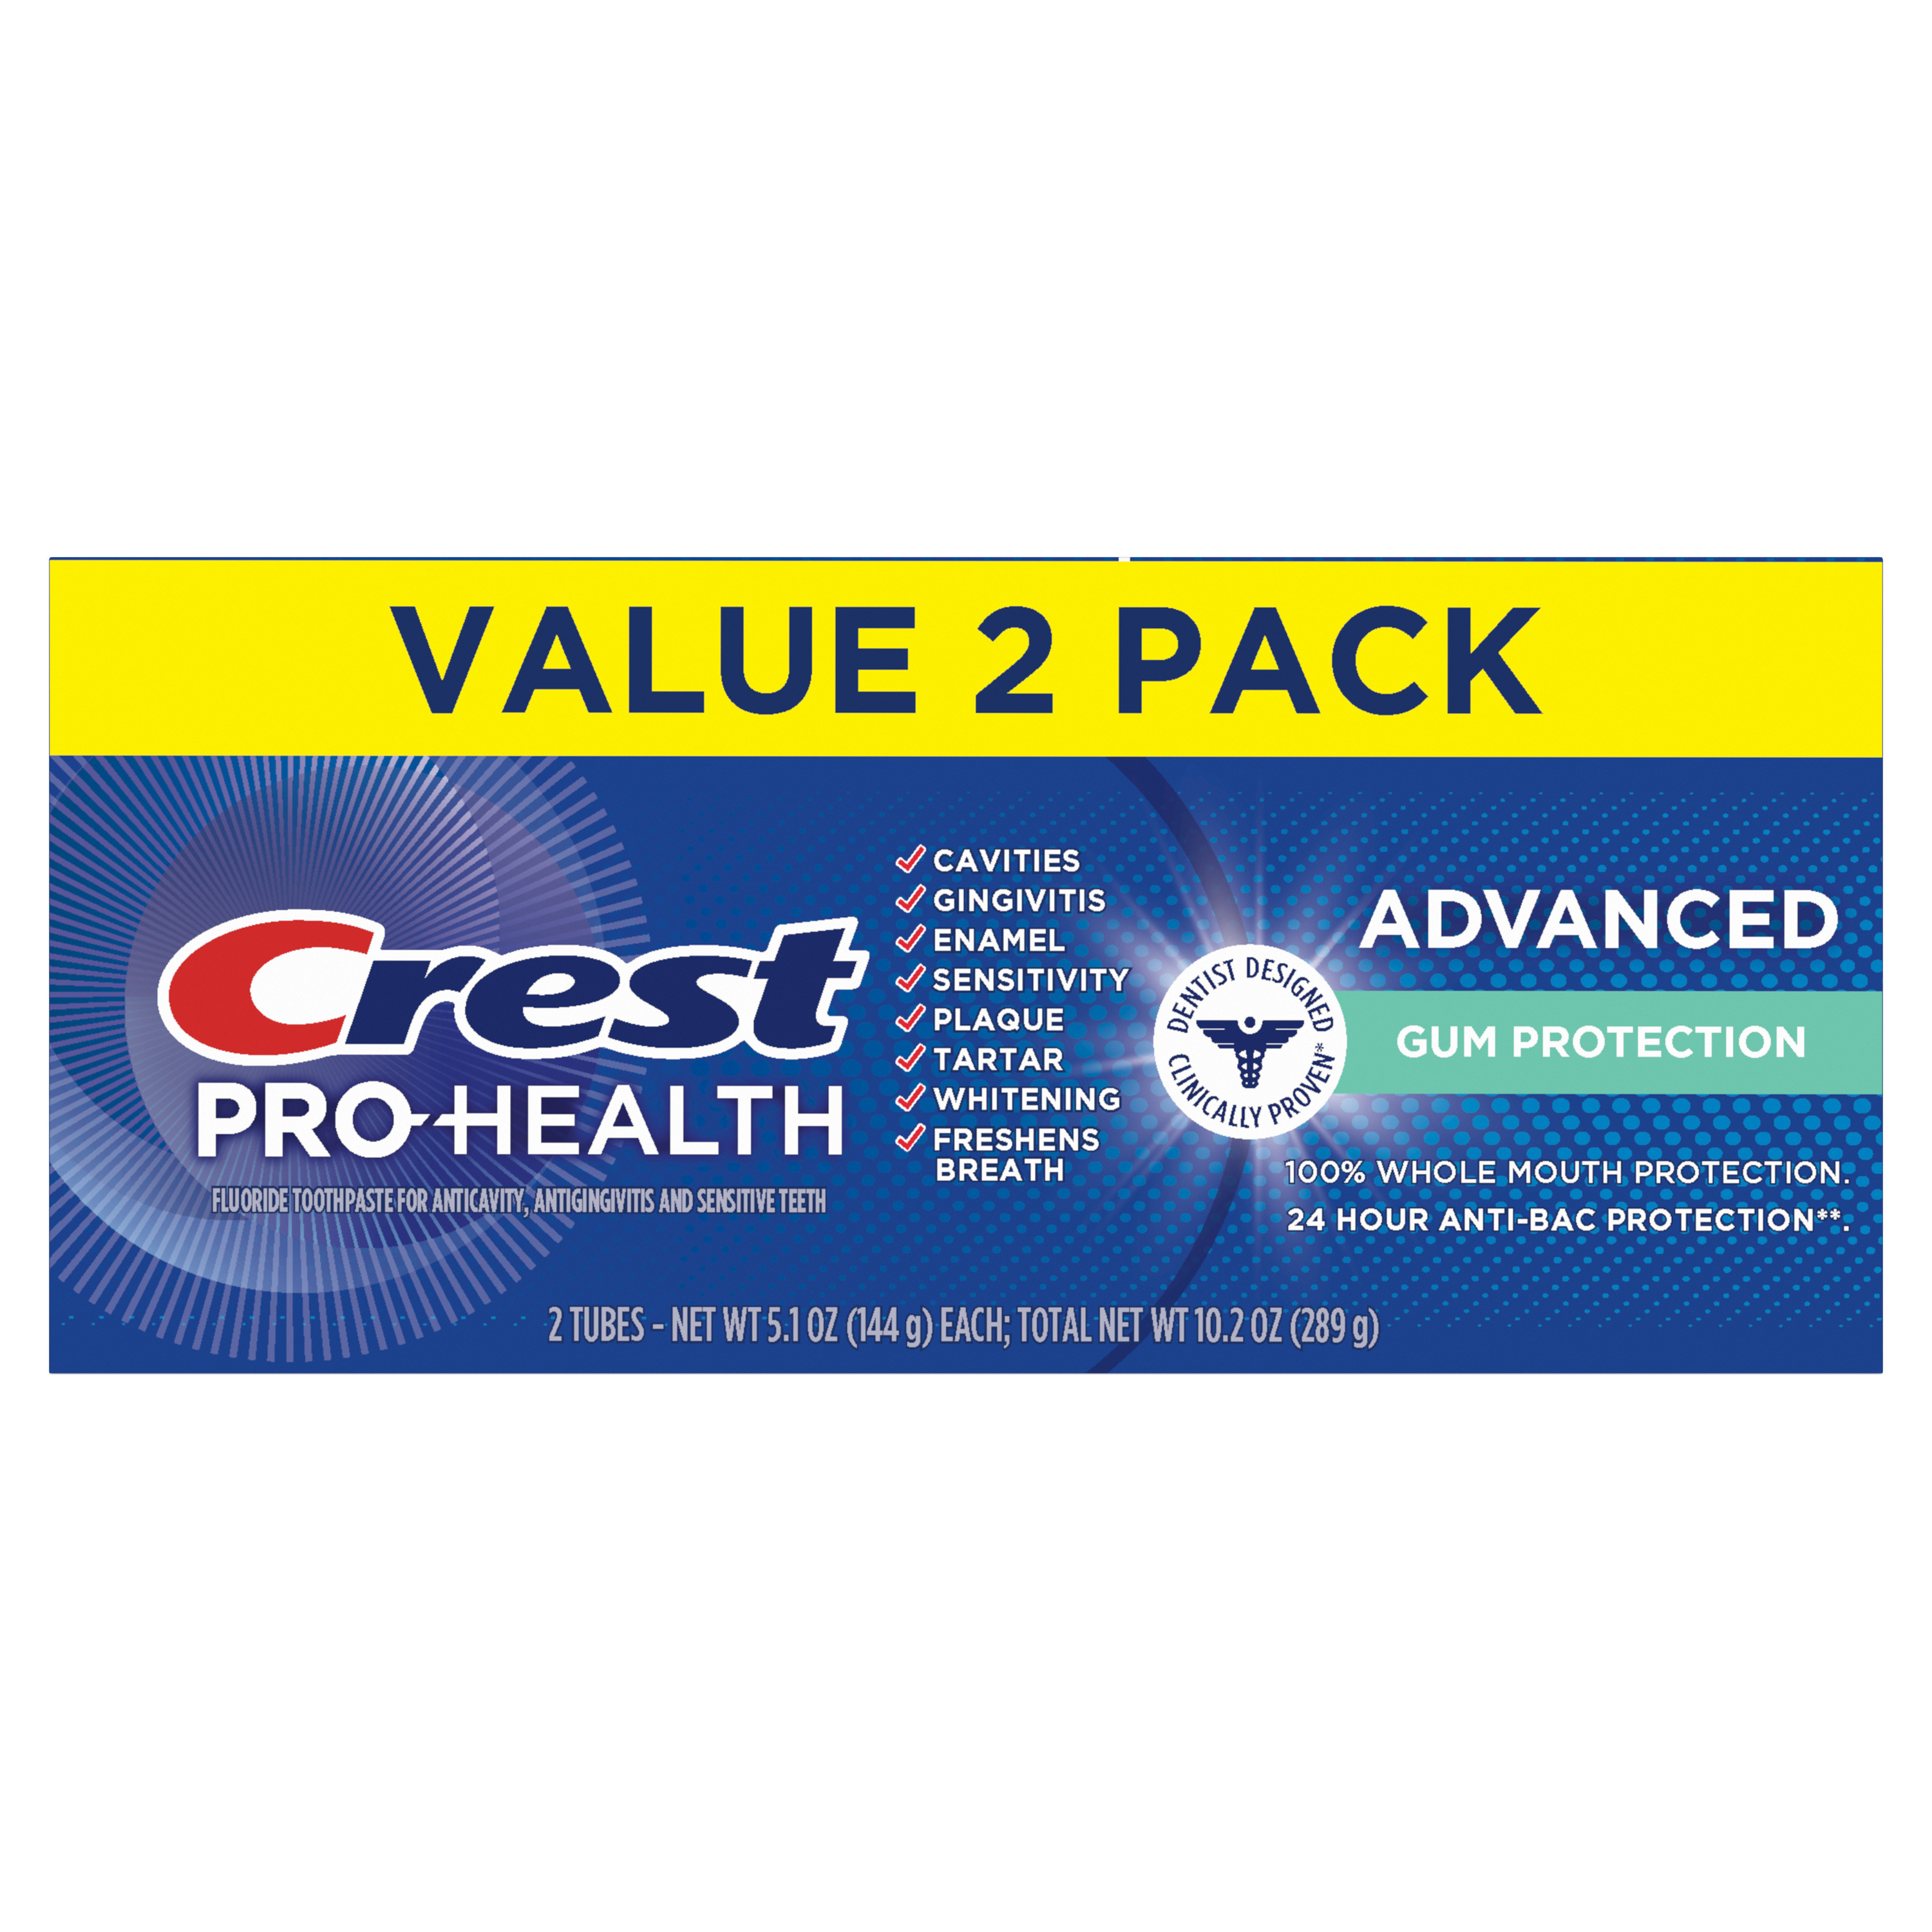 Crest Pro-Health Advanced Gum Protection Toothpaste (5.1oz), 2 Count - image 2 of 6